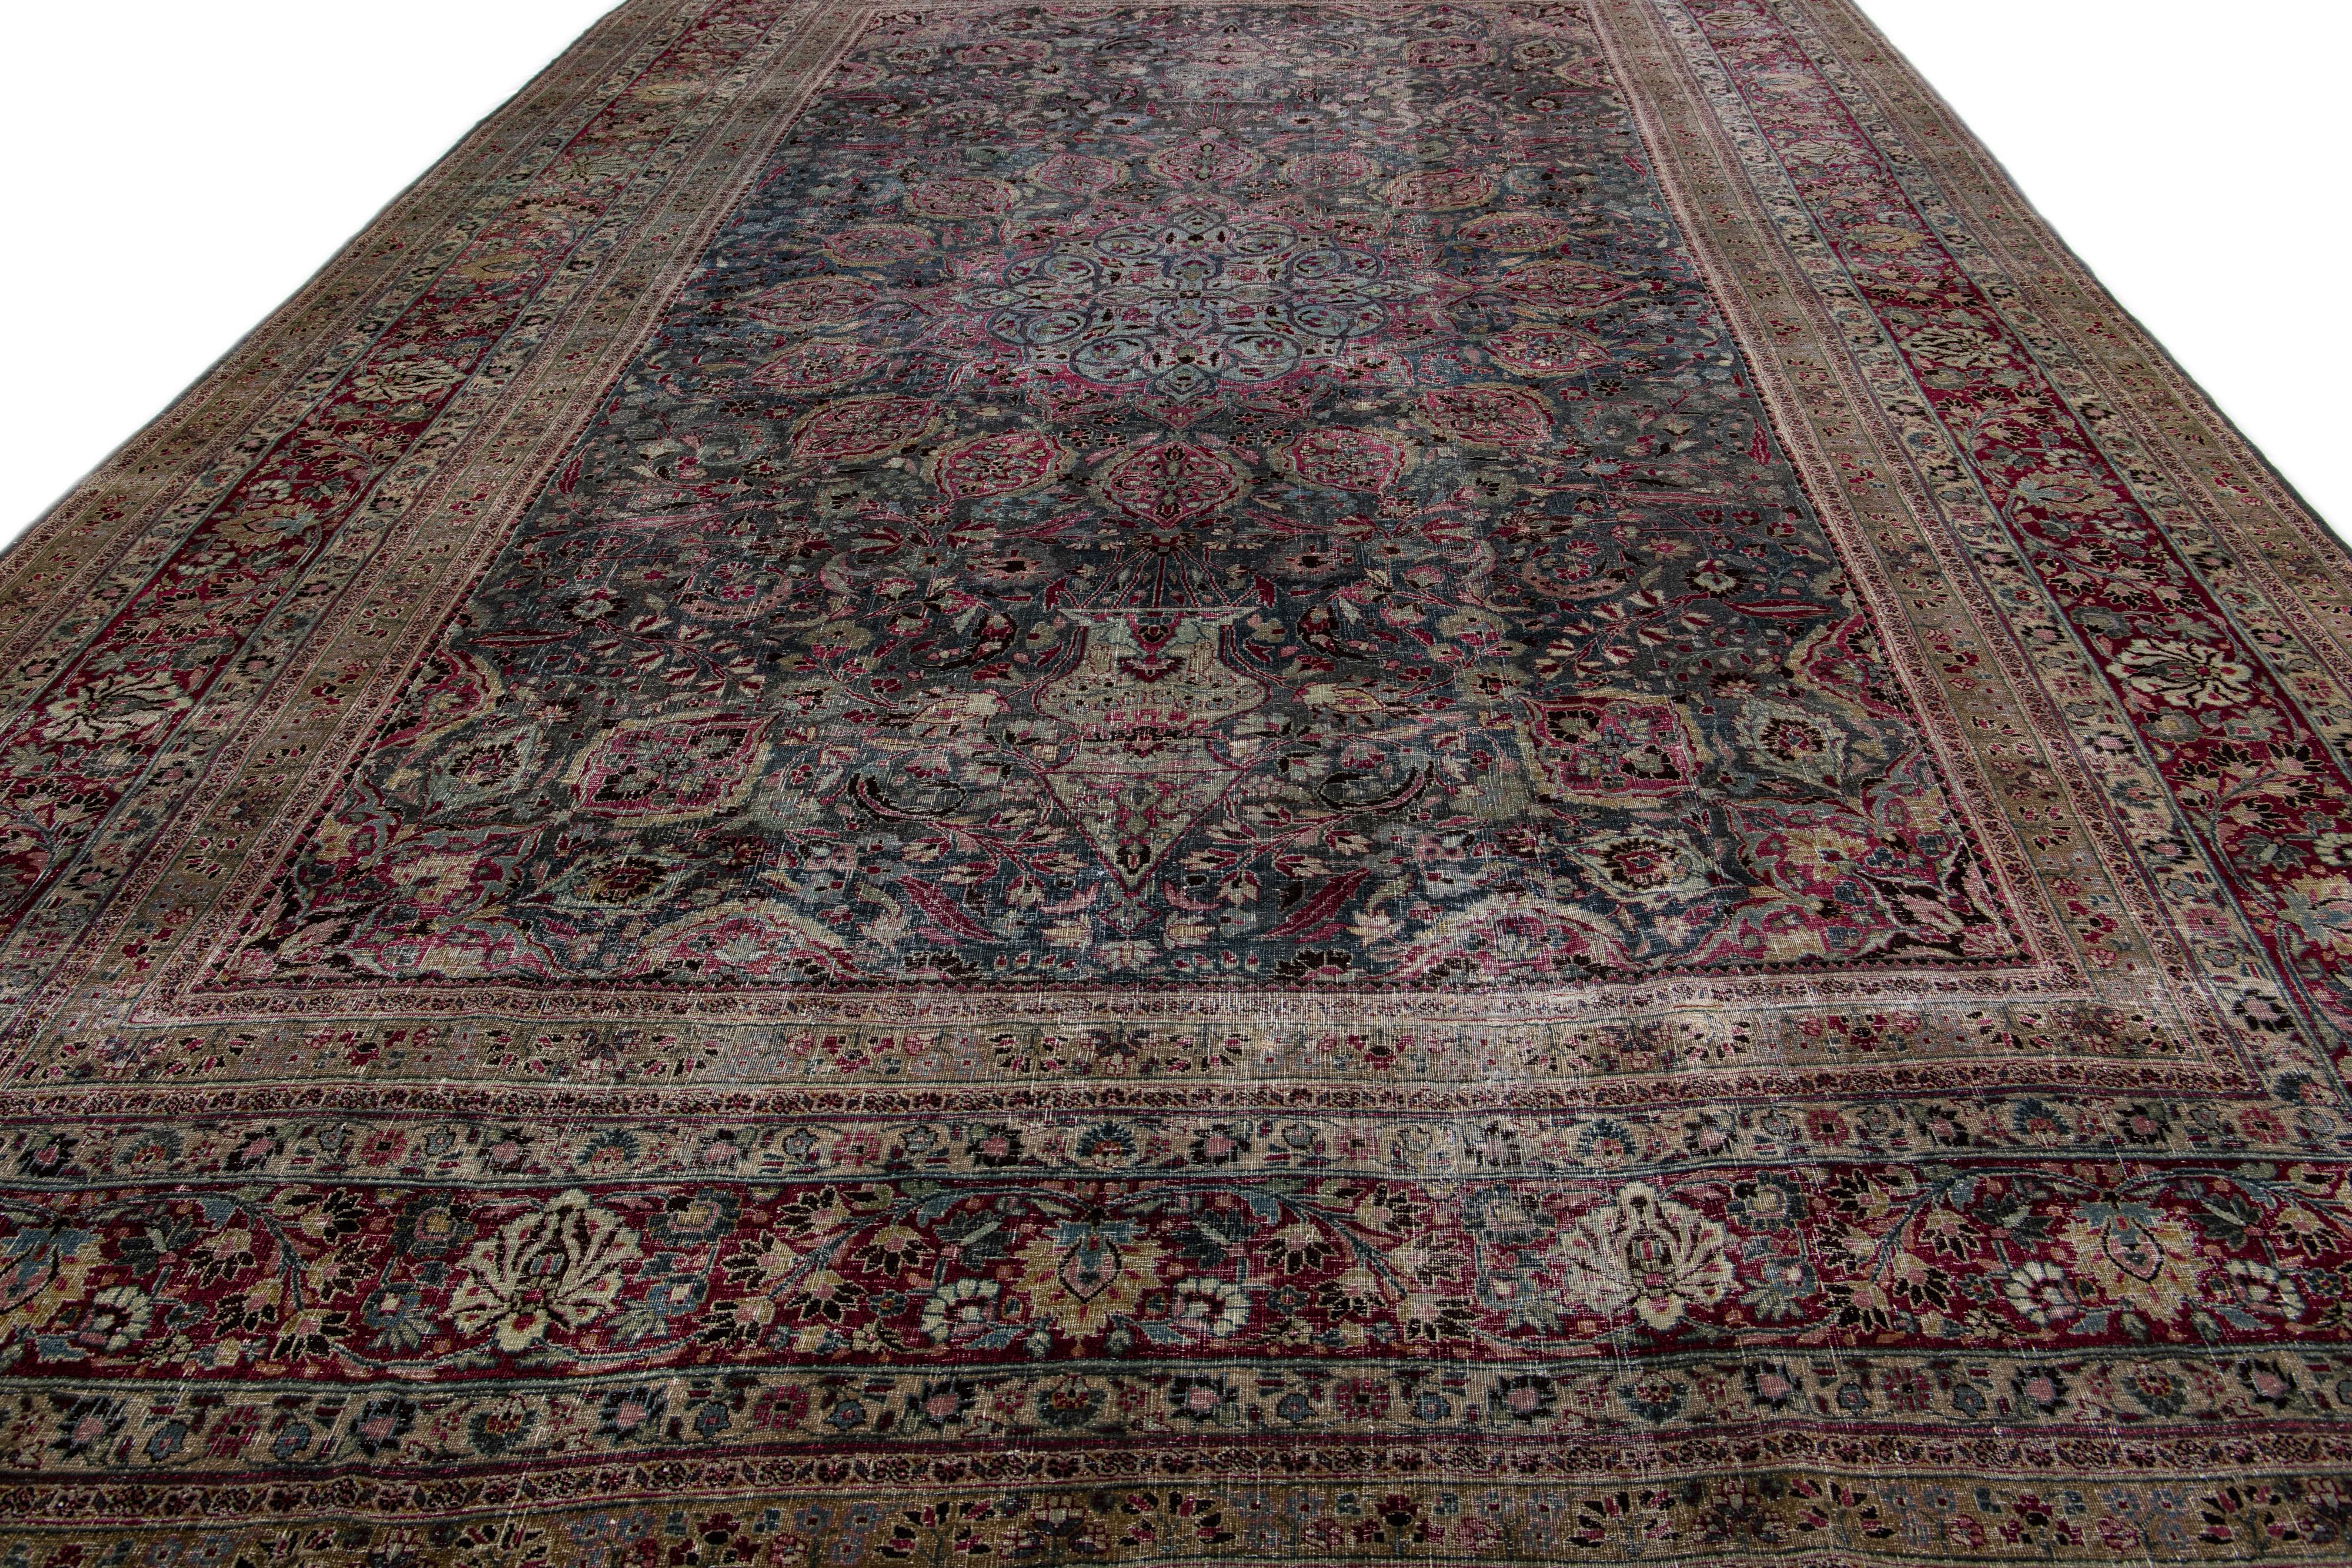 Beautiful antique overdyed hand-knotted oversize wool rug. This rug has a gray field with pink and tan accents in the center medallion design,

This rug measures: 11' 5